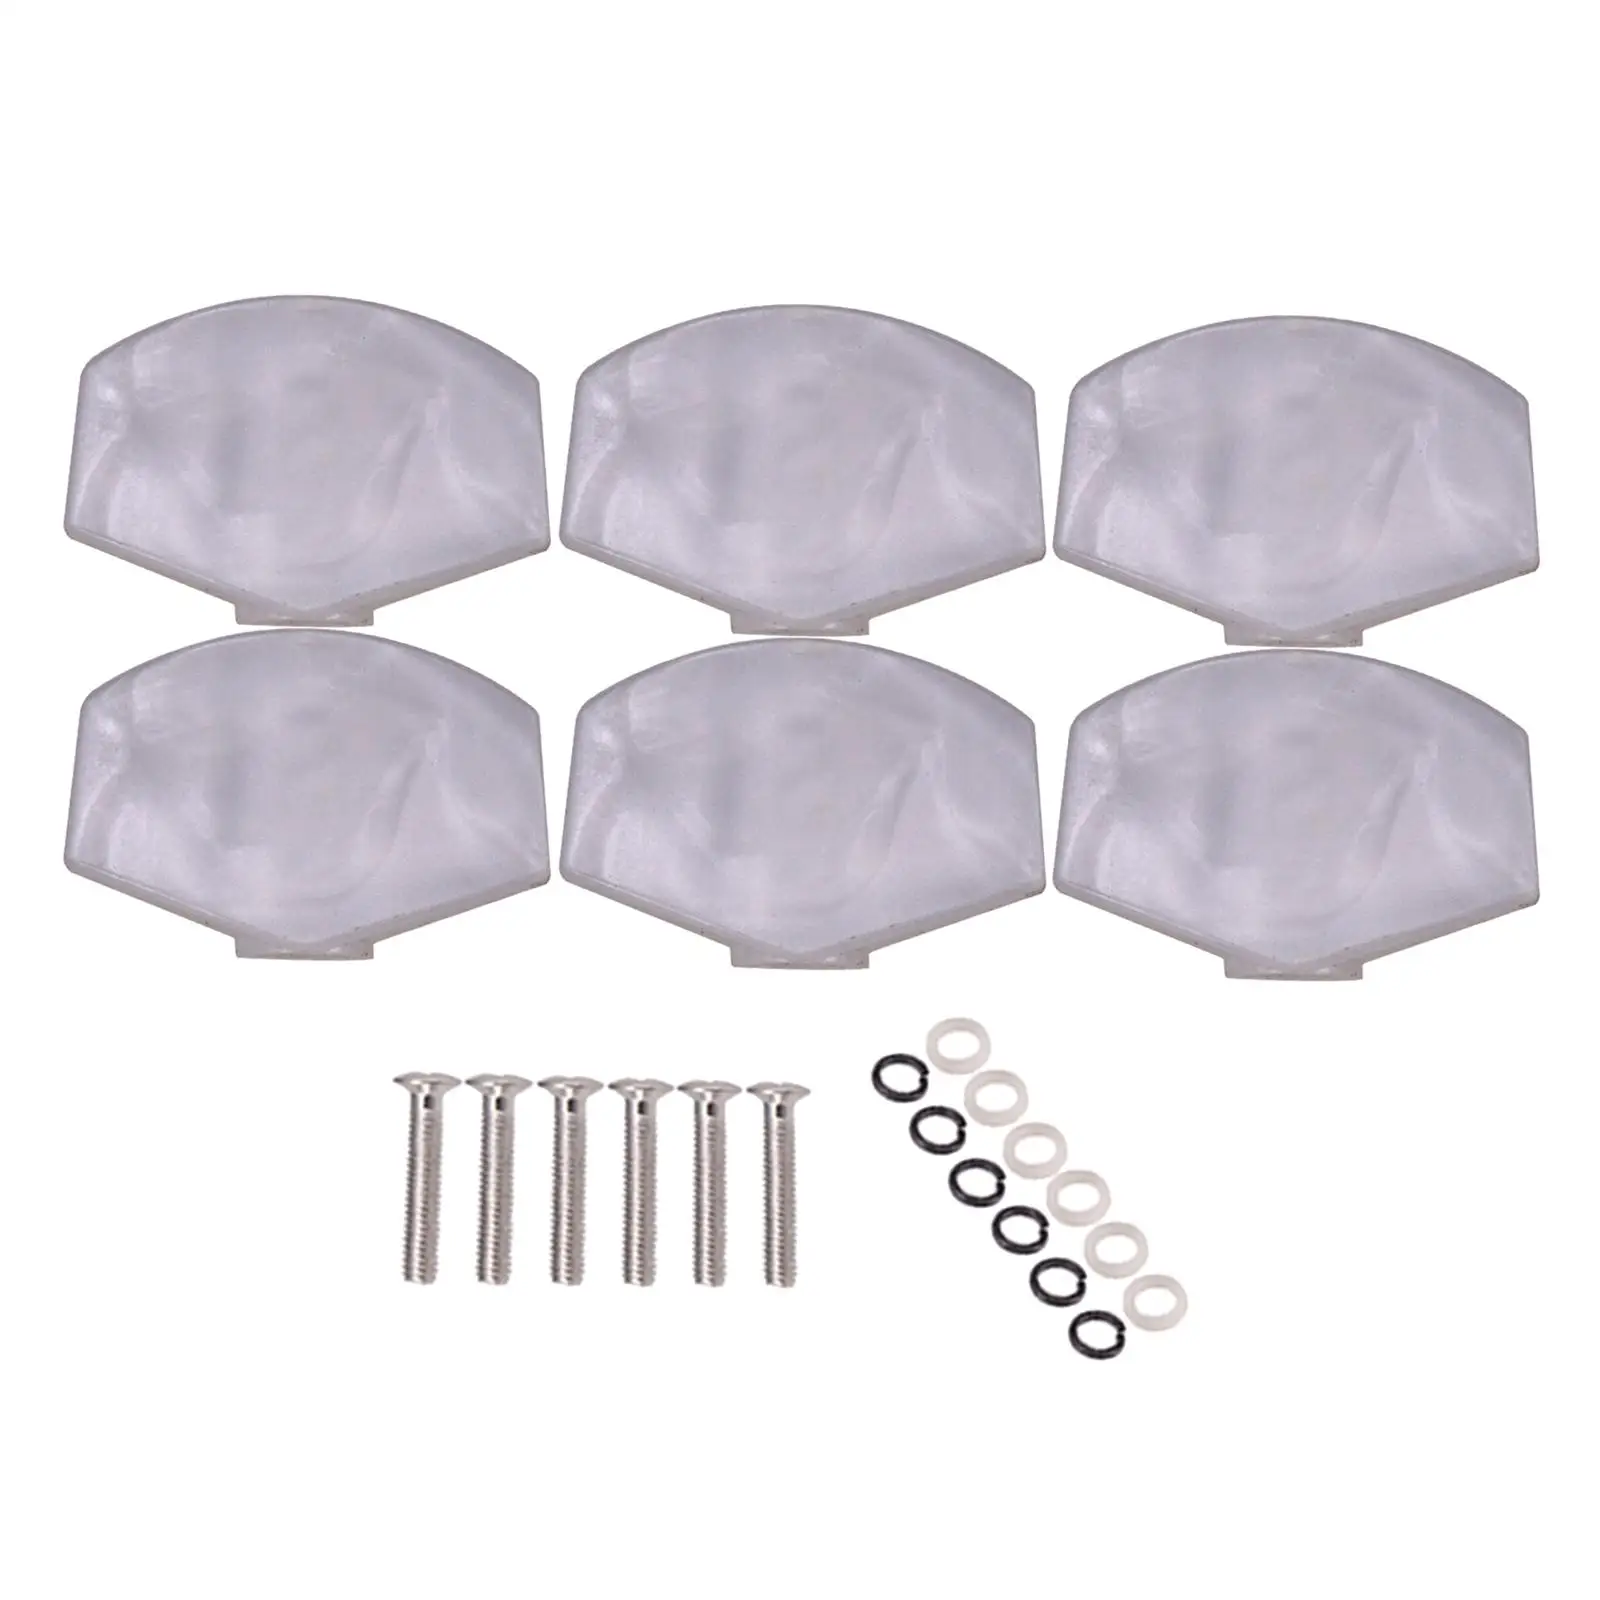 6pcs Guitar Tuning Pegs Caps Machine Head Classical Guitar Replacement Buttons Knobs for Acoustic Folk Guitar